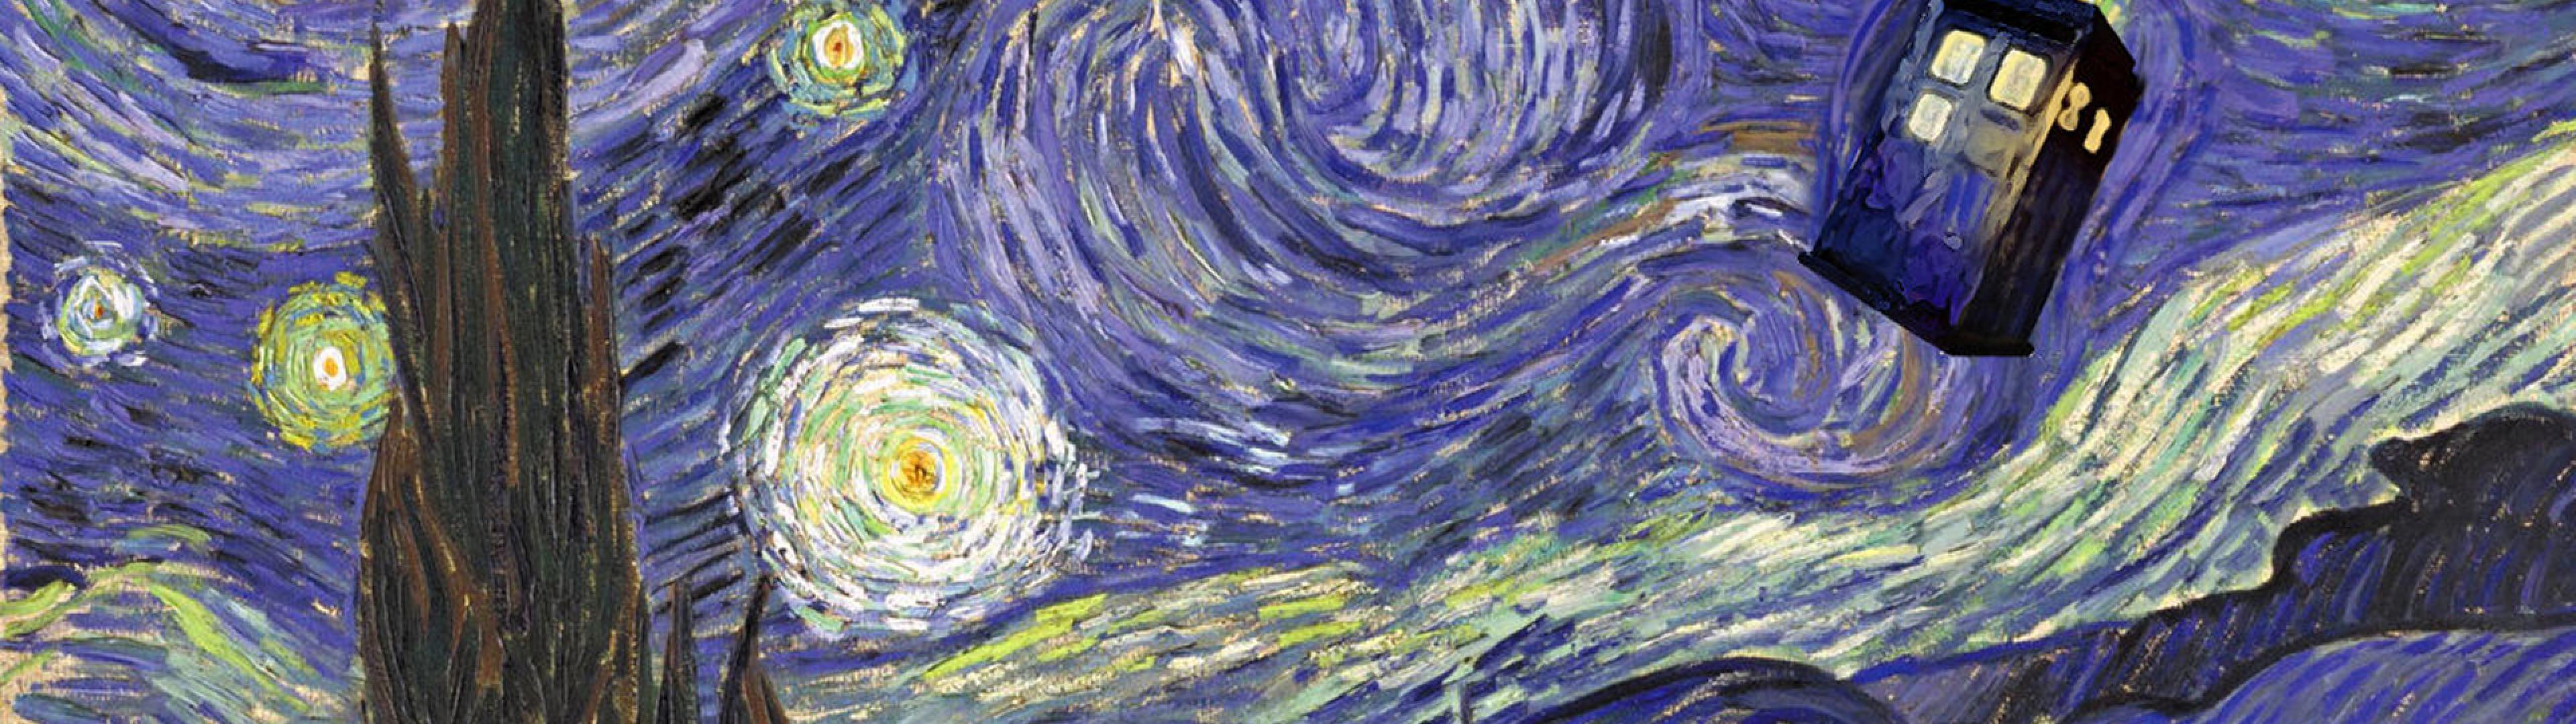 Doctor Who Starry Night Wallpaper